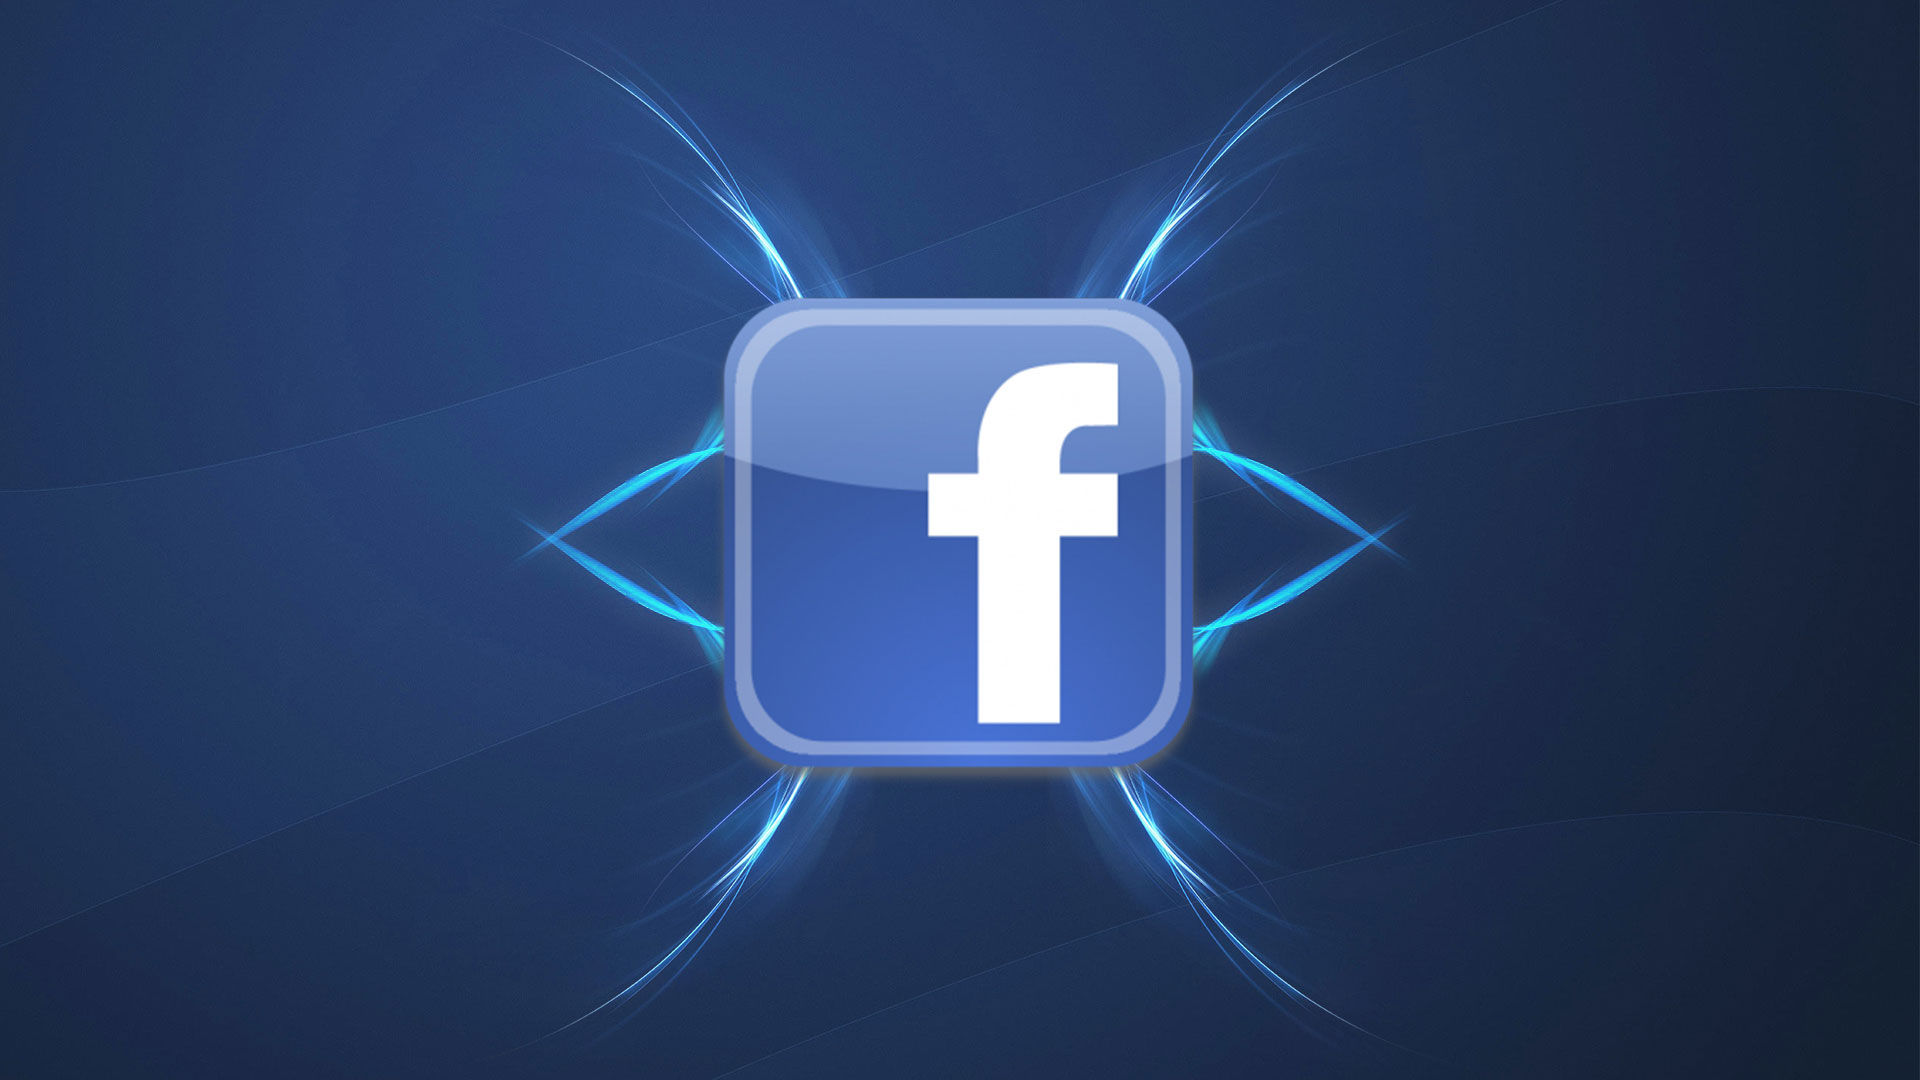 How to Add Admin to Facebook Page